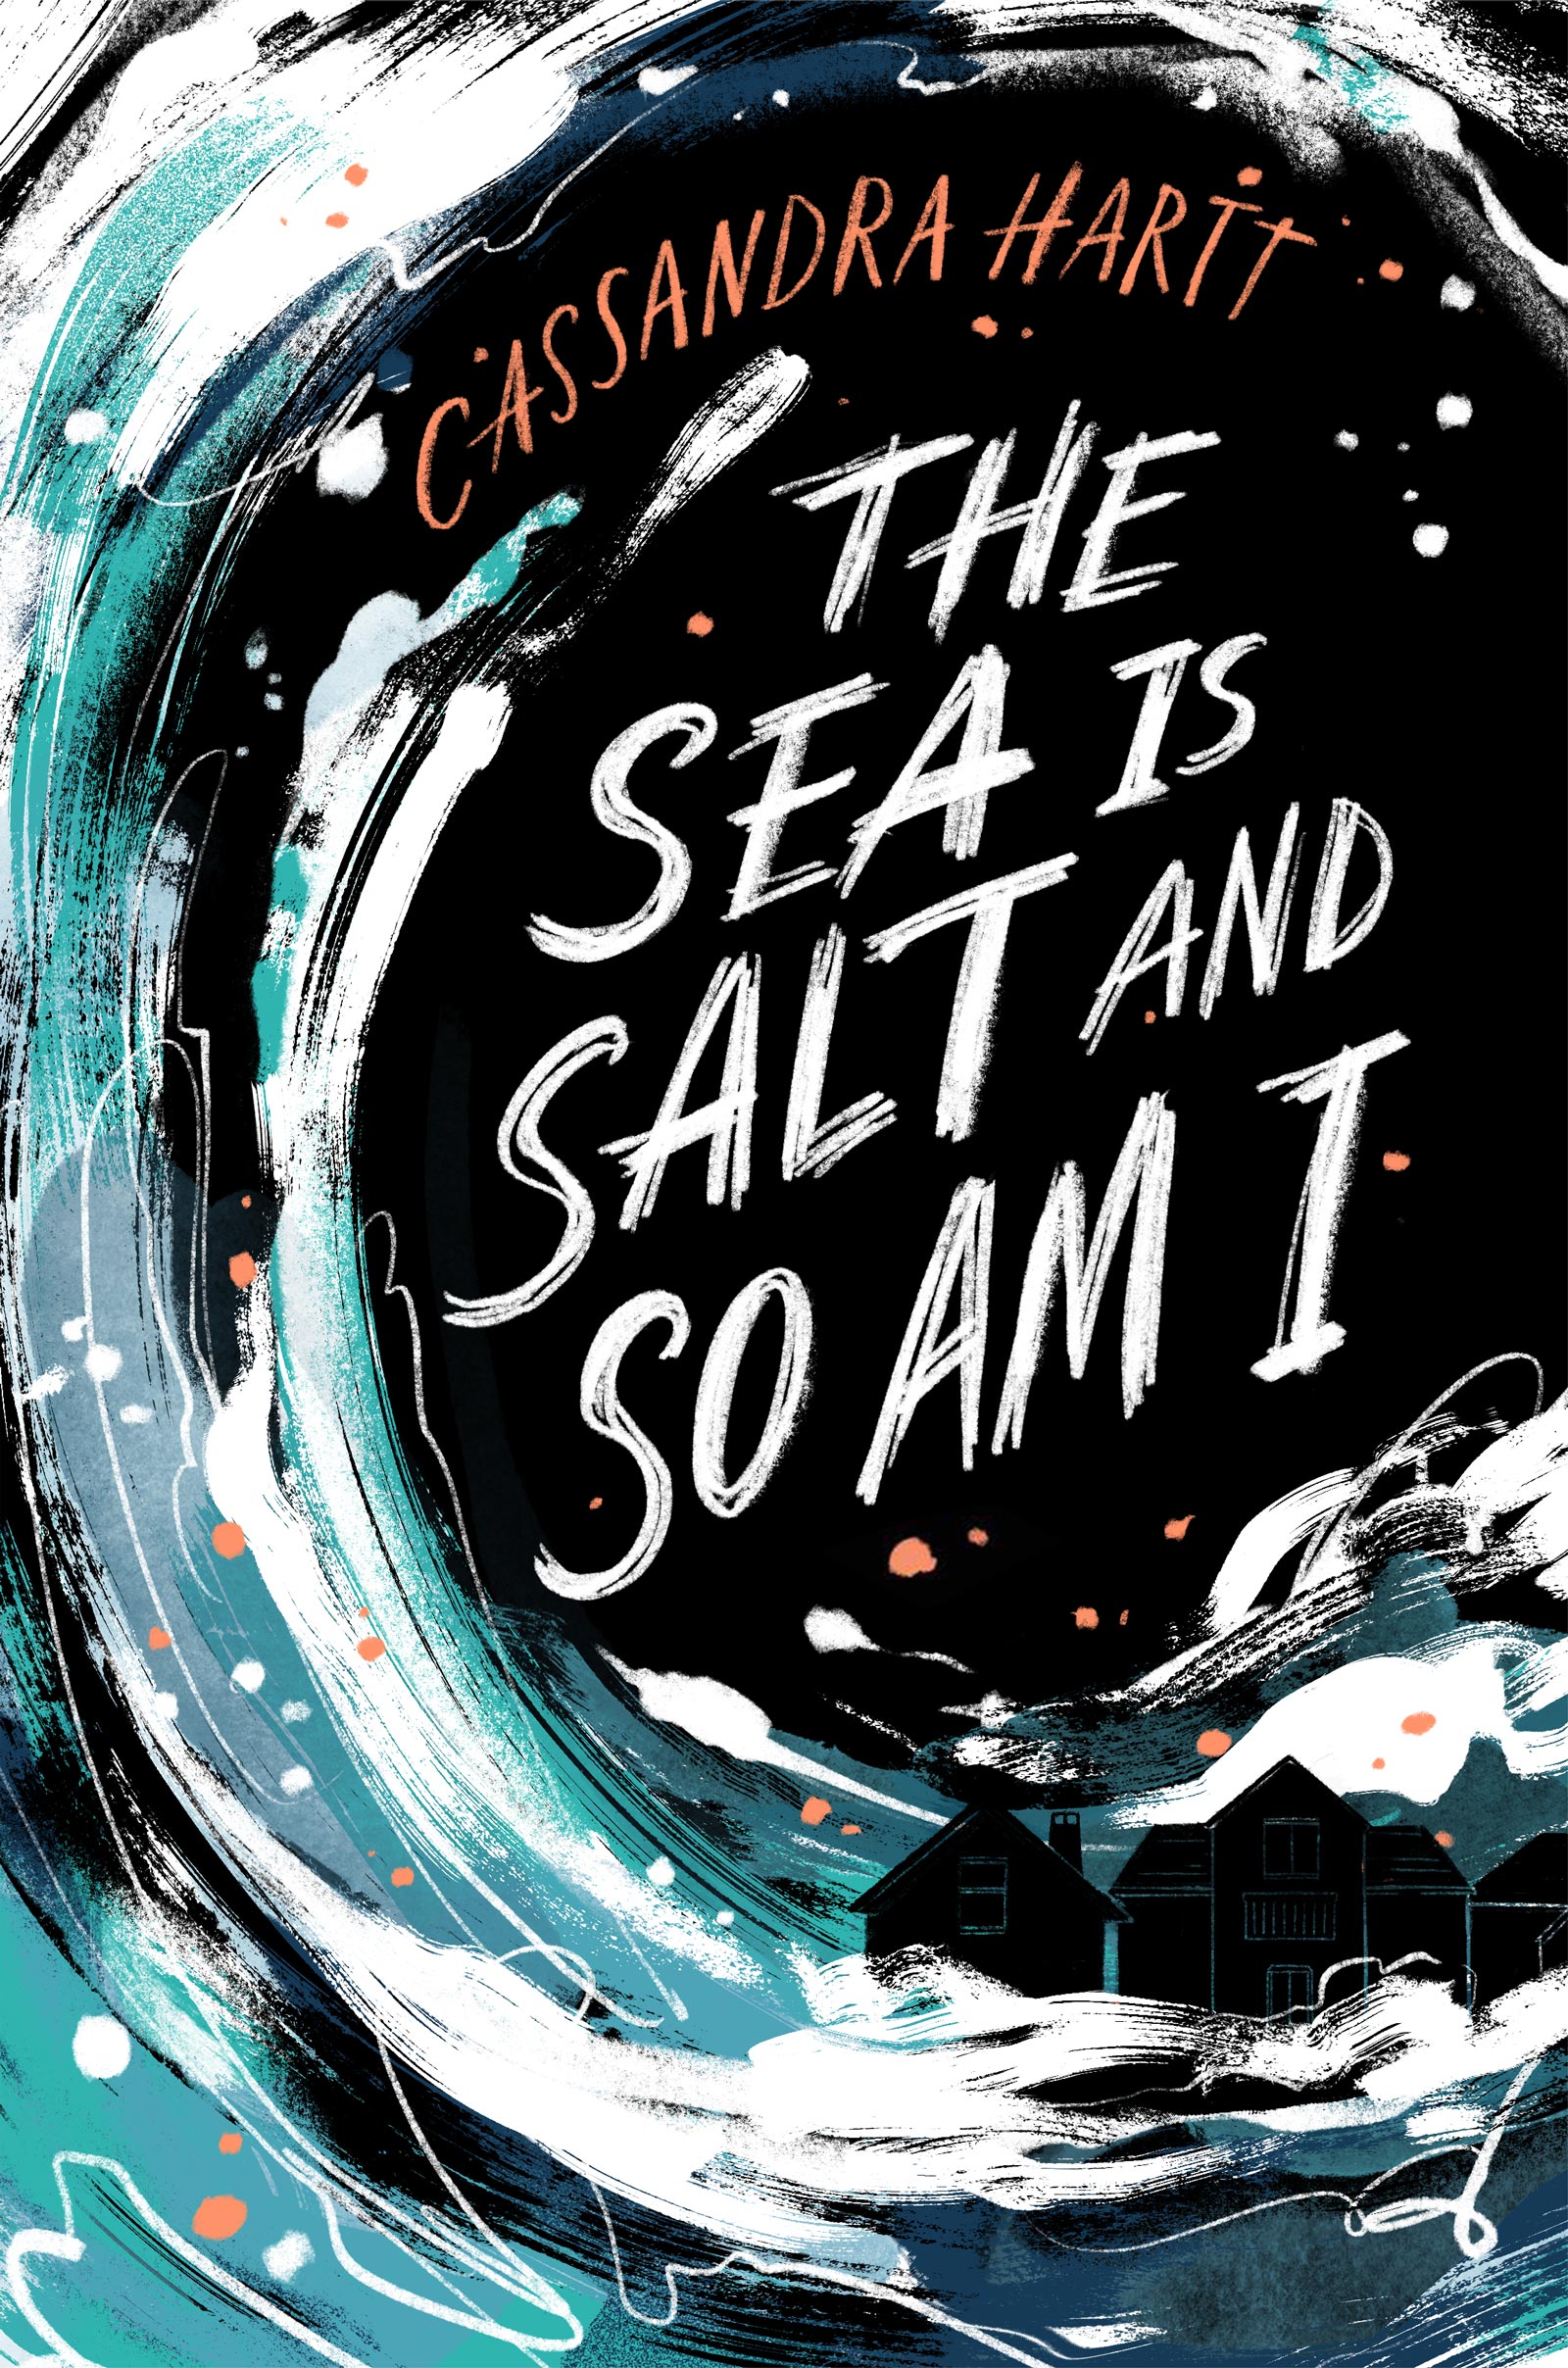 Front cover art for The Sea is Salt and So Am I